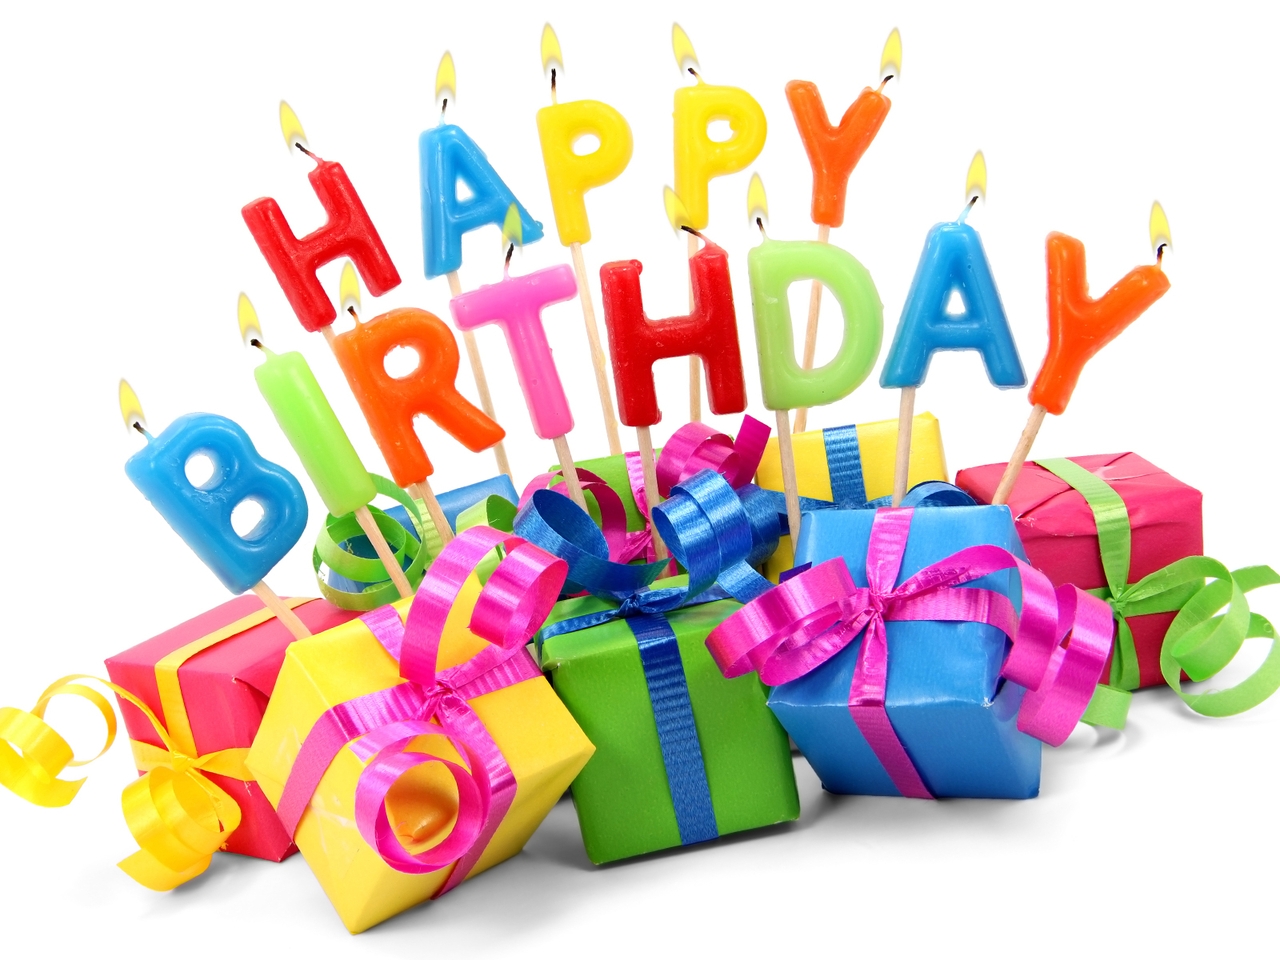 Image: Birthday, gifts, ribbon, letters, candles